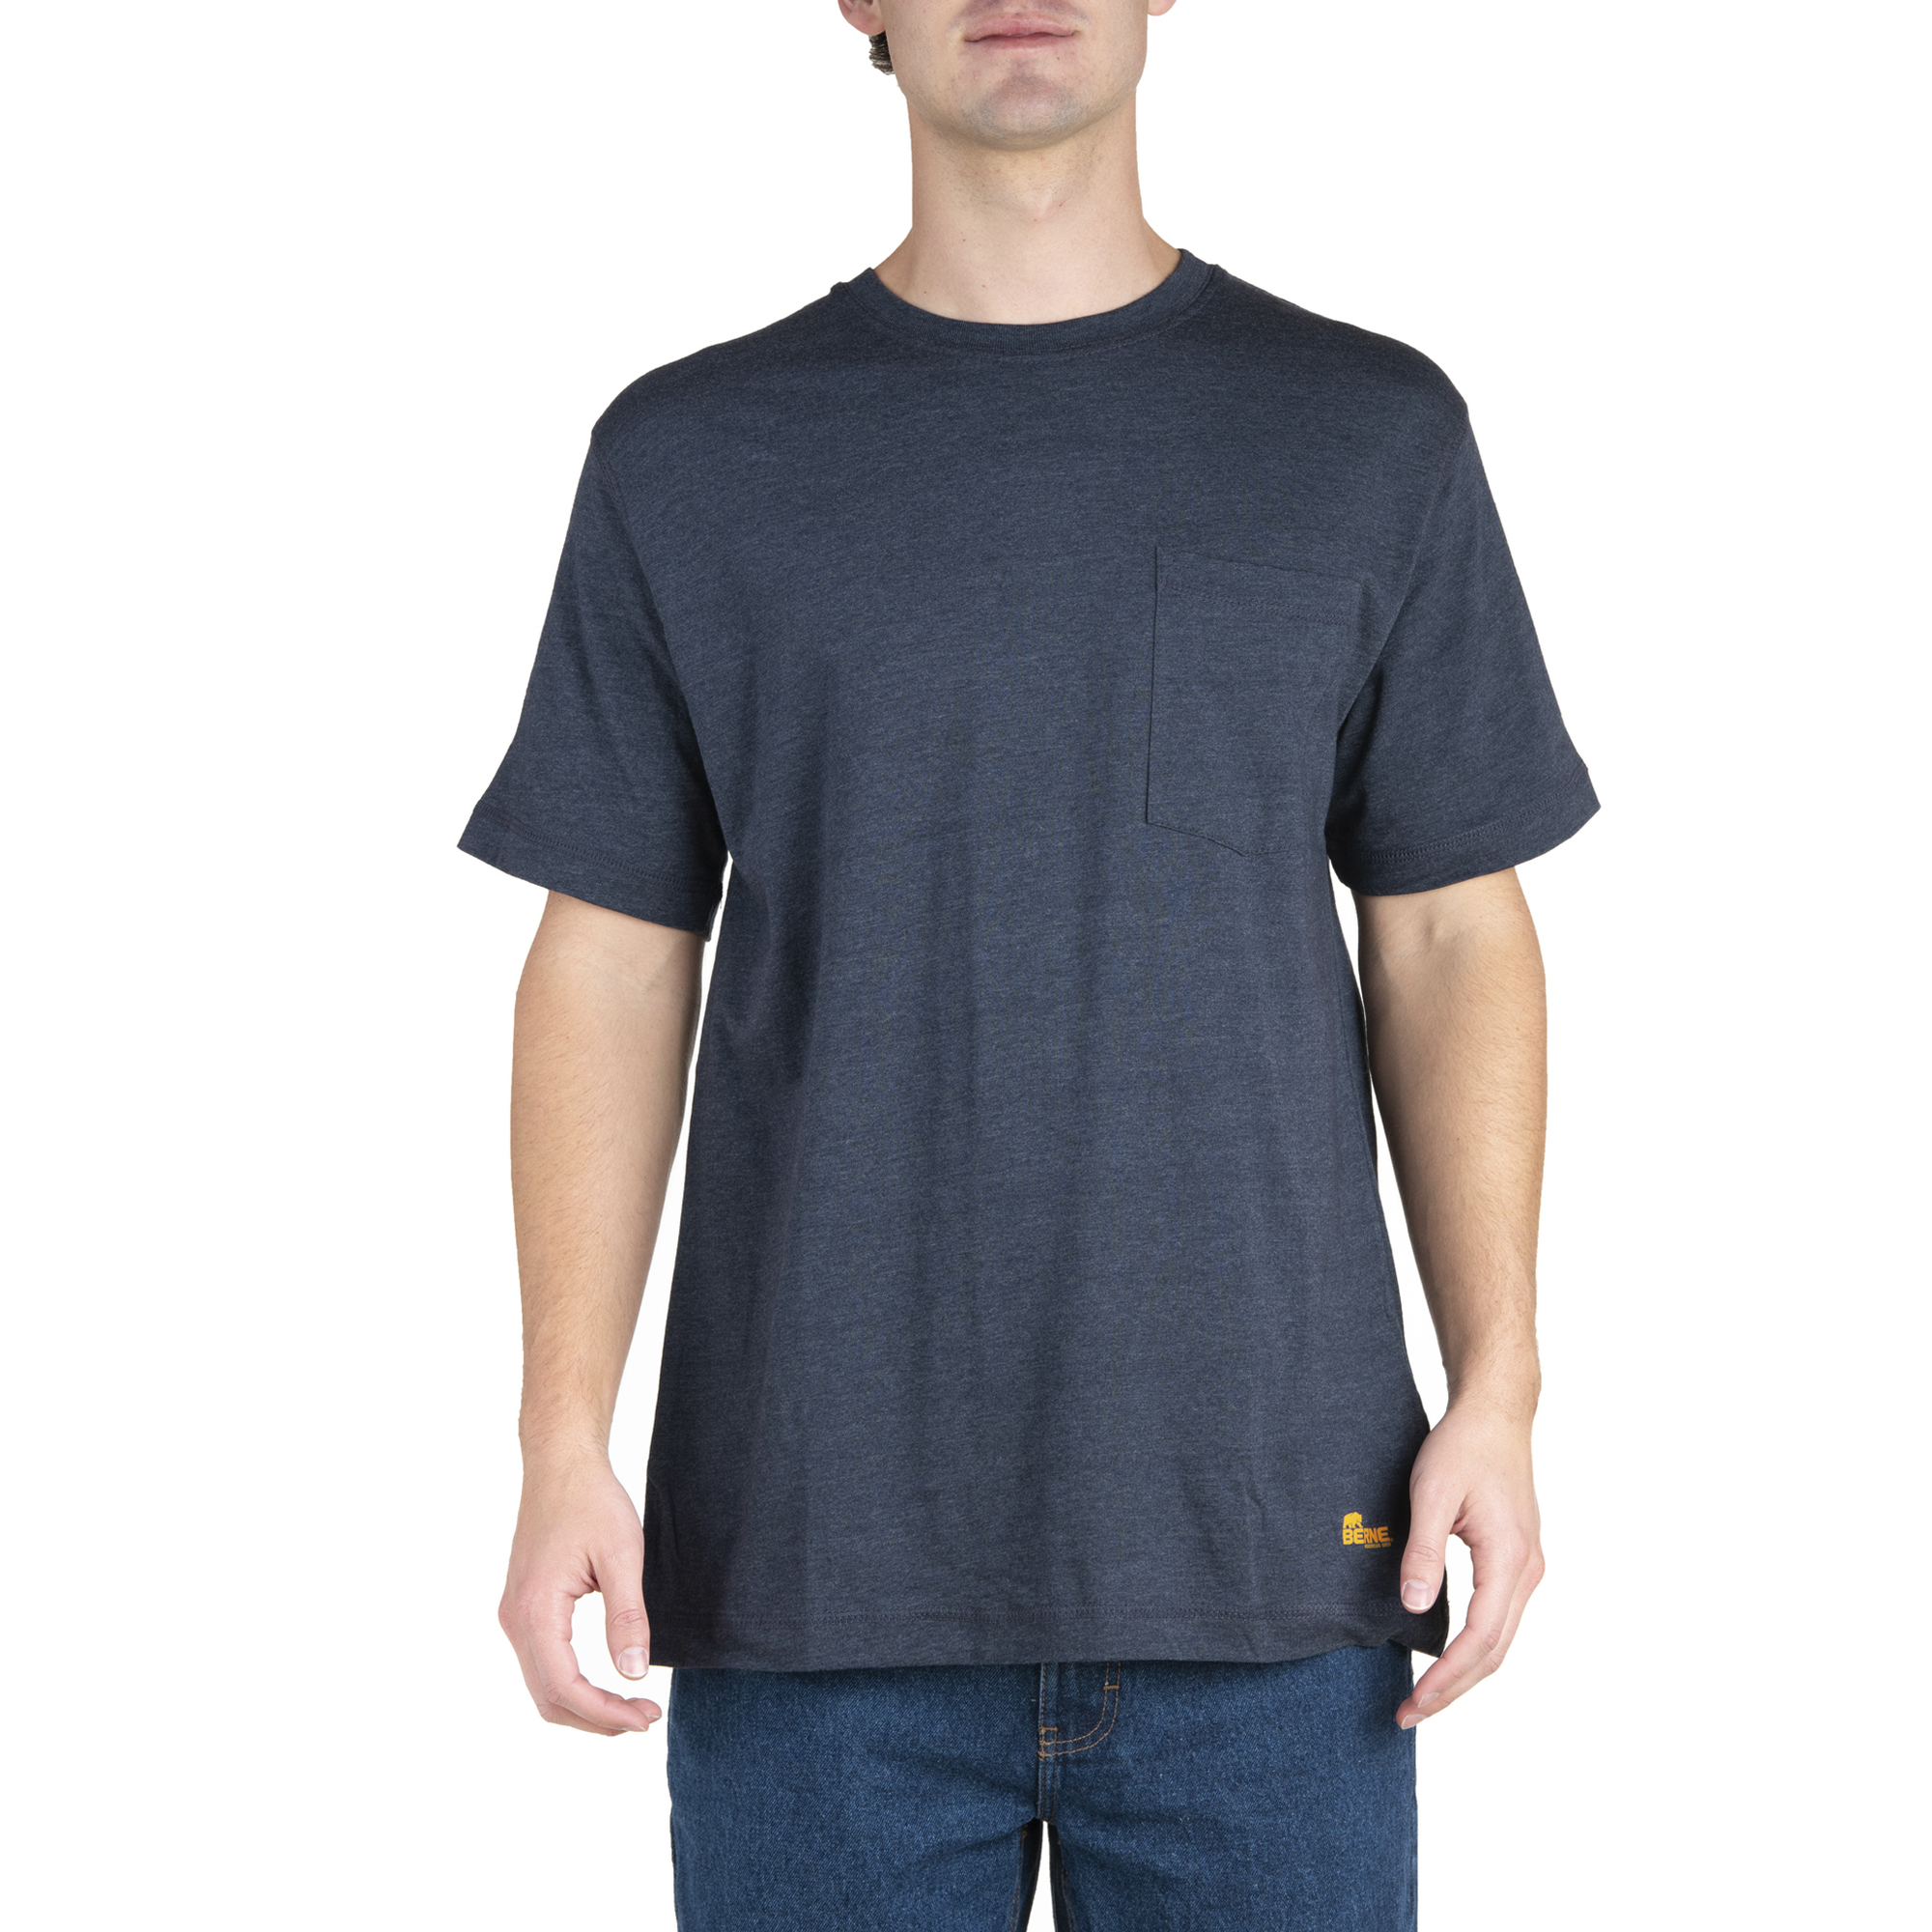 Berne Apparel, Lightweight Performance Tee-Style, Size XL, Color Space Blue (Heathered), Material 60% Cotton 40% Polyester, Model BSM38